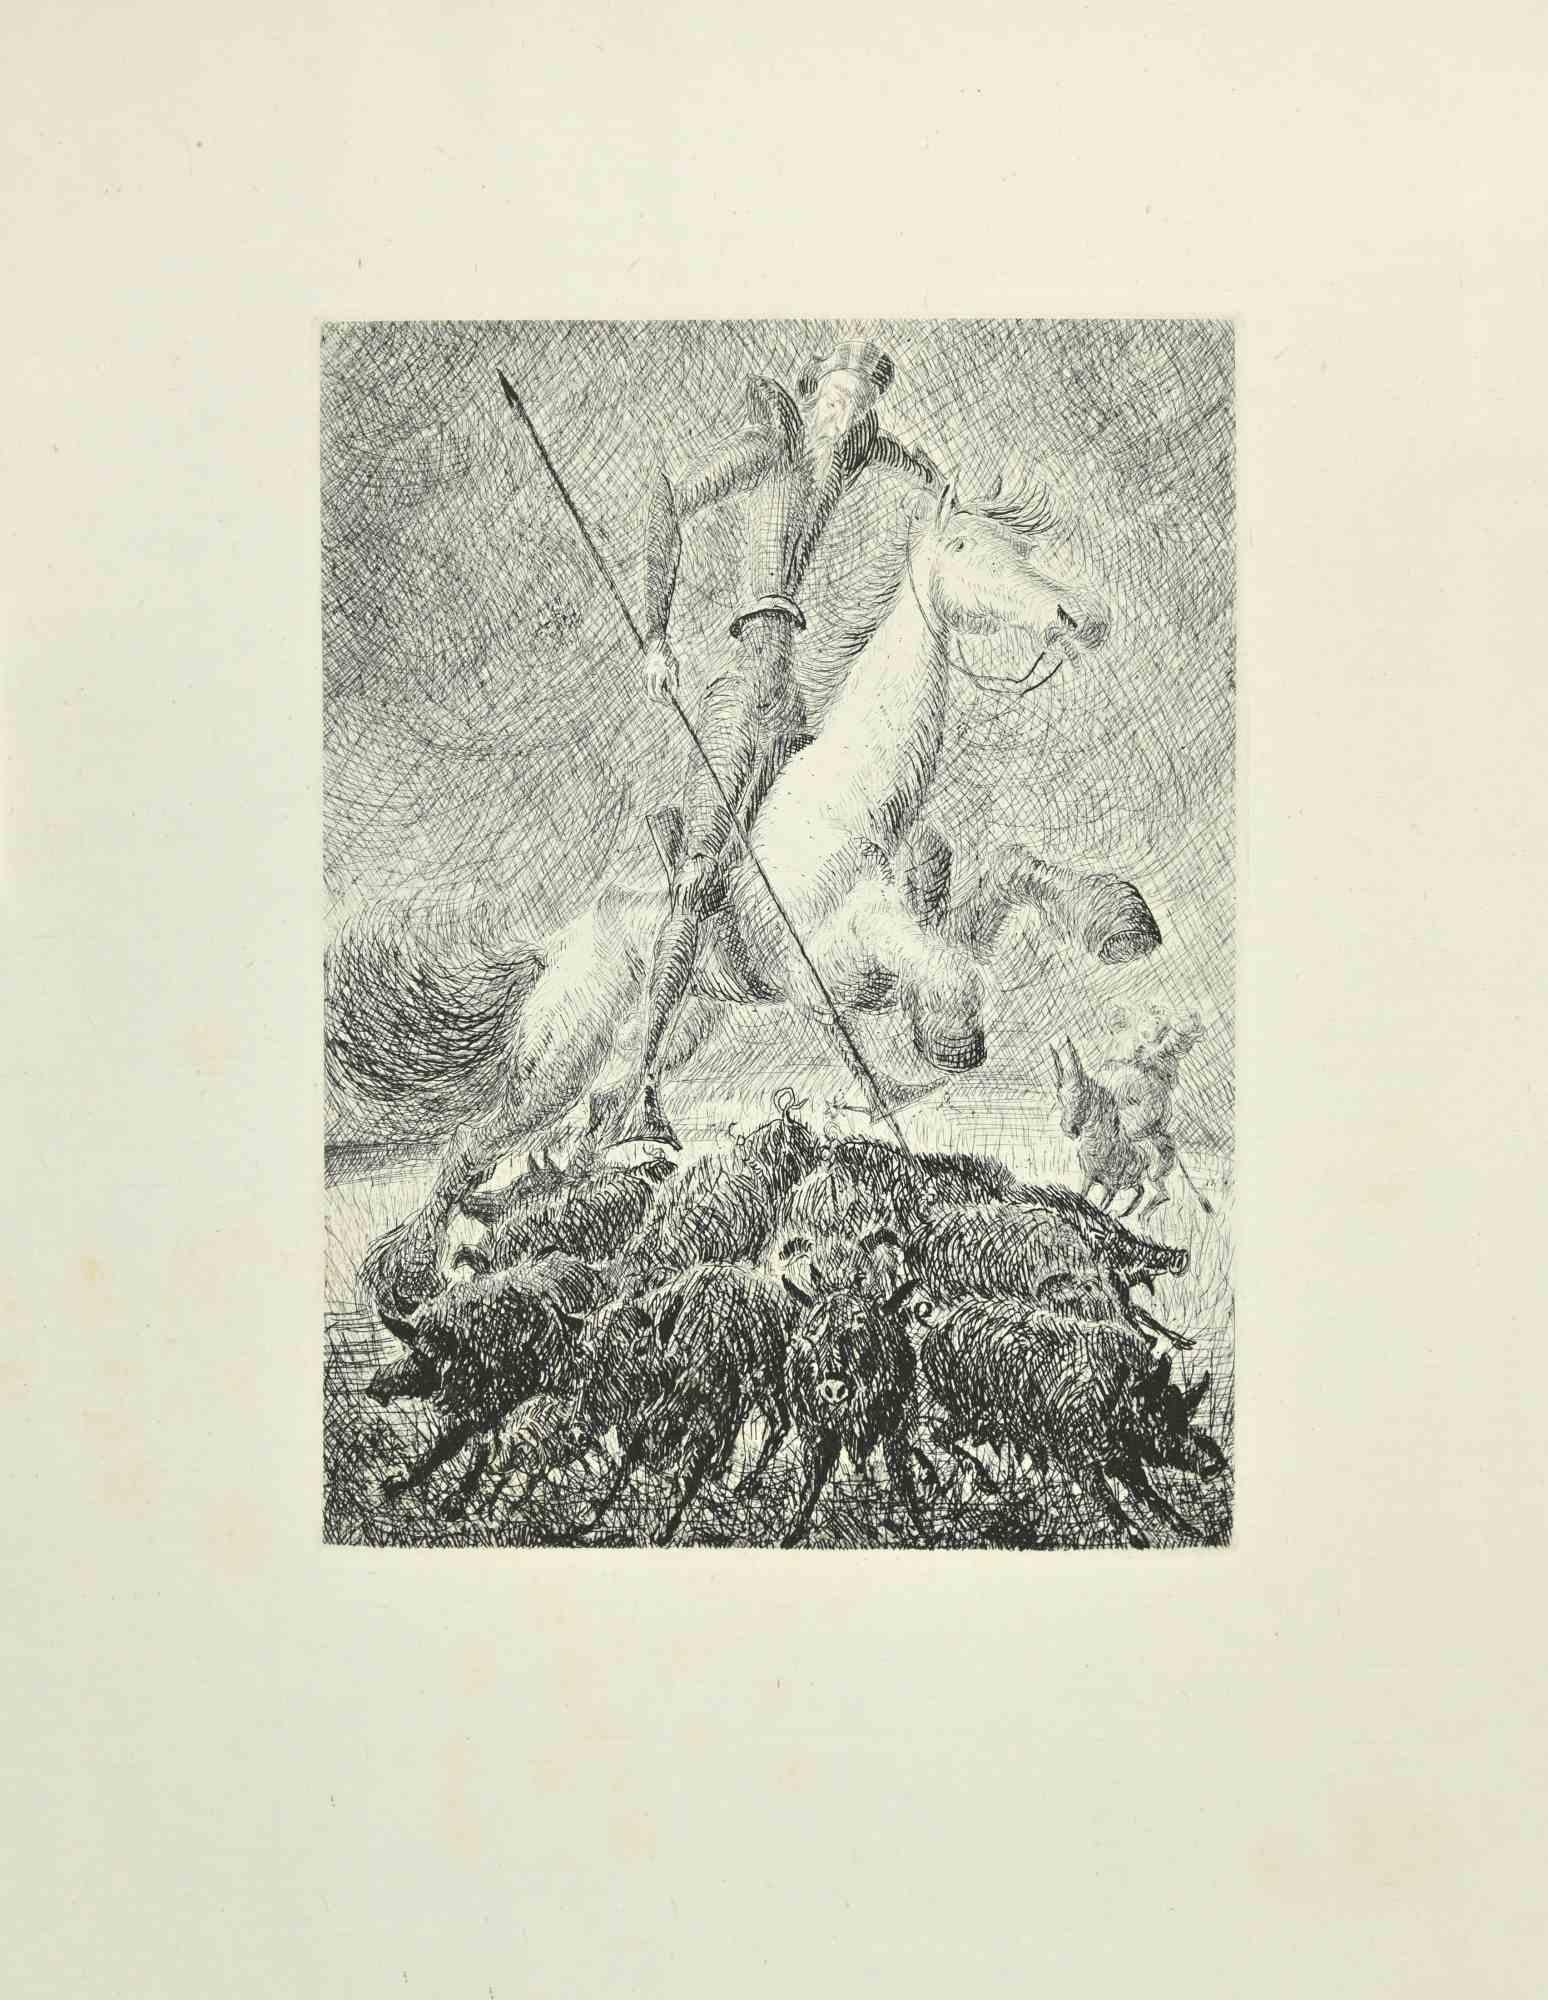 Don Quixote's Hunt is an etching and drypoint print on ivory-colored China paper, realized by Wladyslaw Jahl in 1951.

They belong to a limited edition of 125 specimens.

Good conditions.

The artwork represents a visual scene from Don Quixote Book